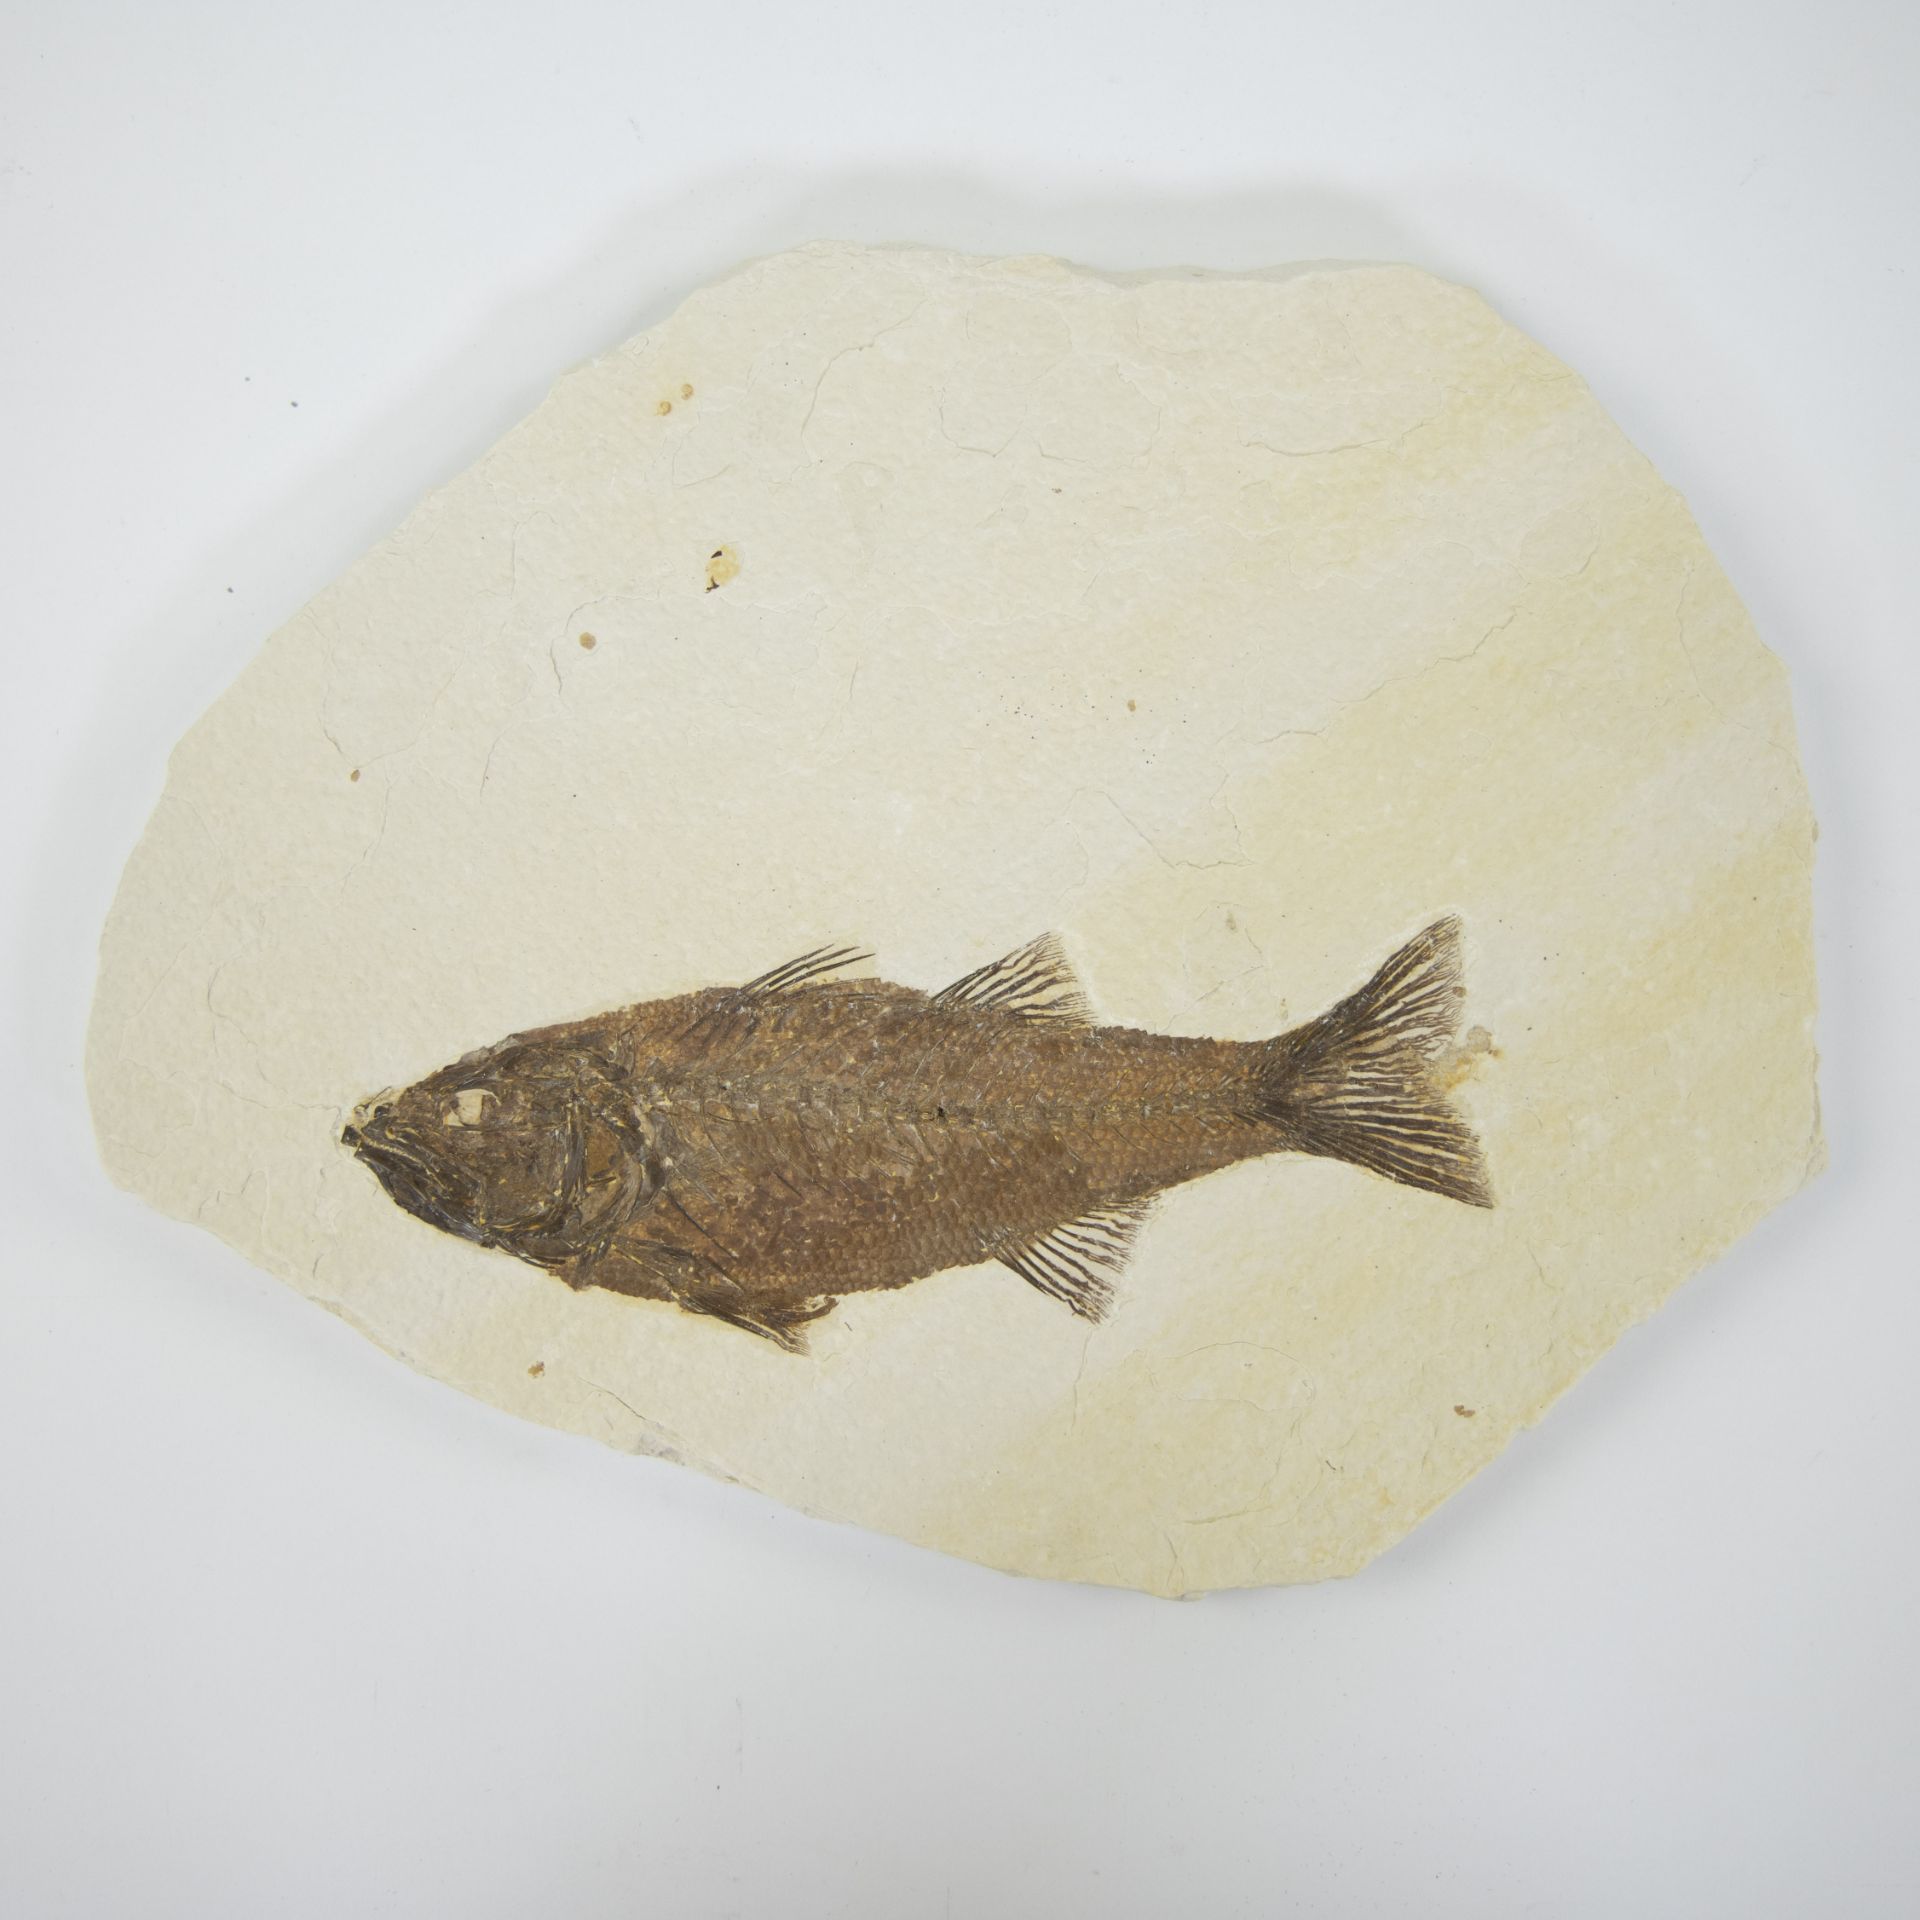 Fossil fish, Mioplosius labracoides, Eocene (55 million y), Green river Formation, Wyoming, USA